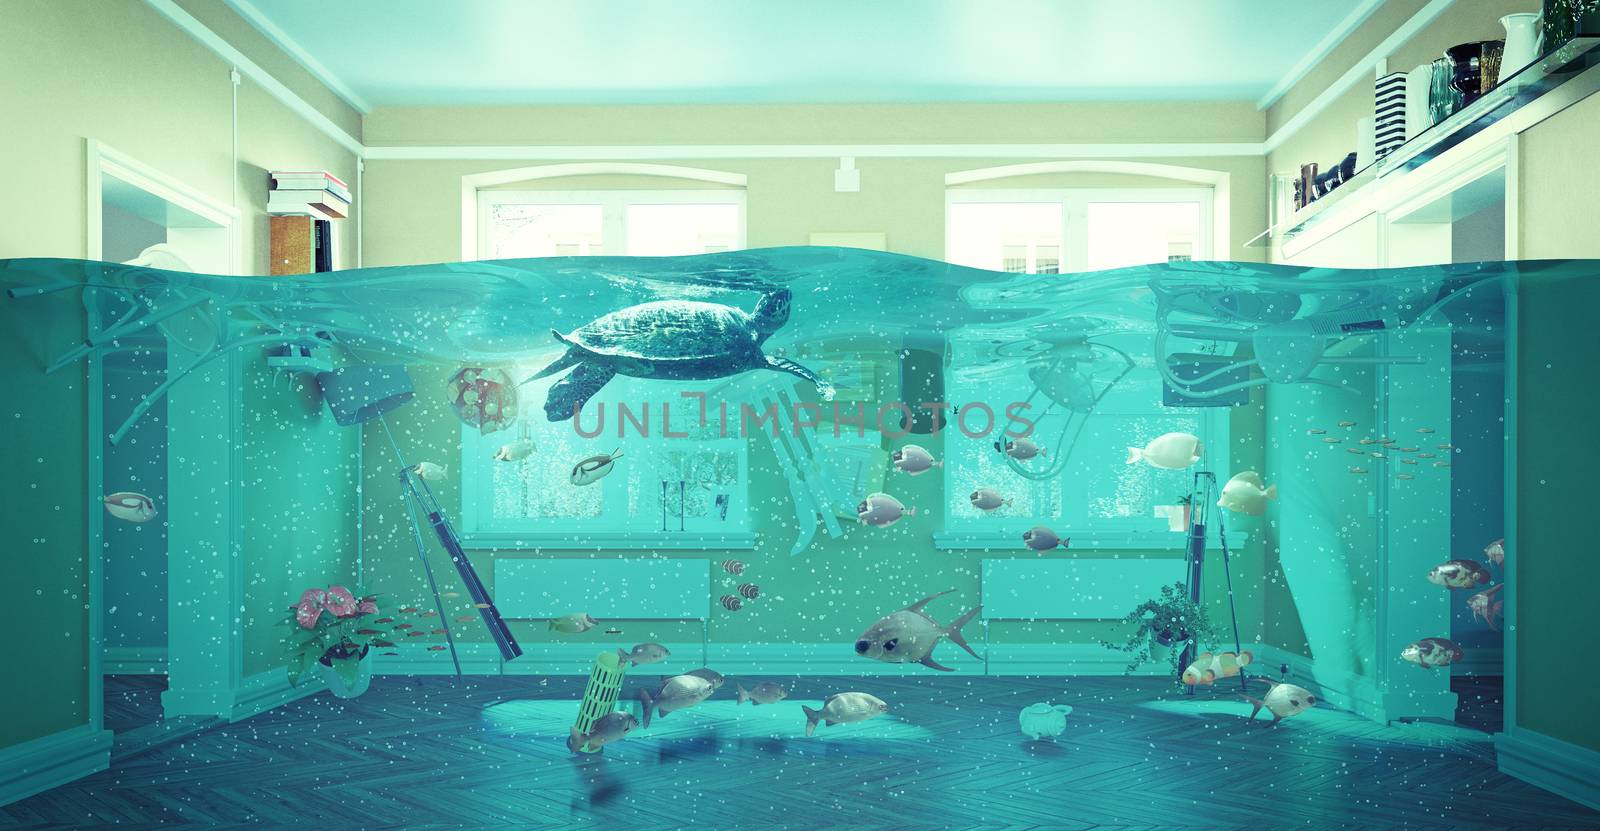 an underwater view in the flooding interior. 3d concept